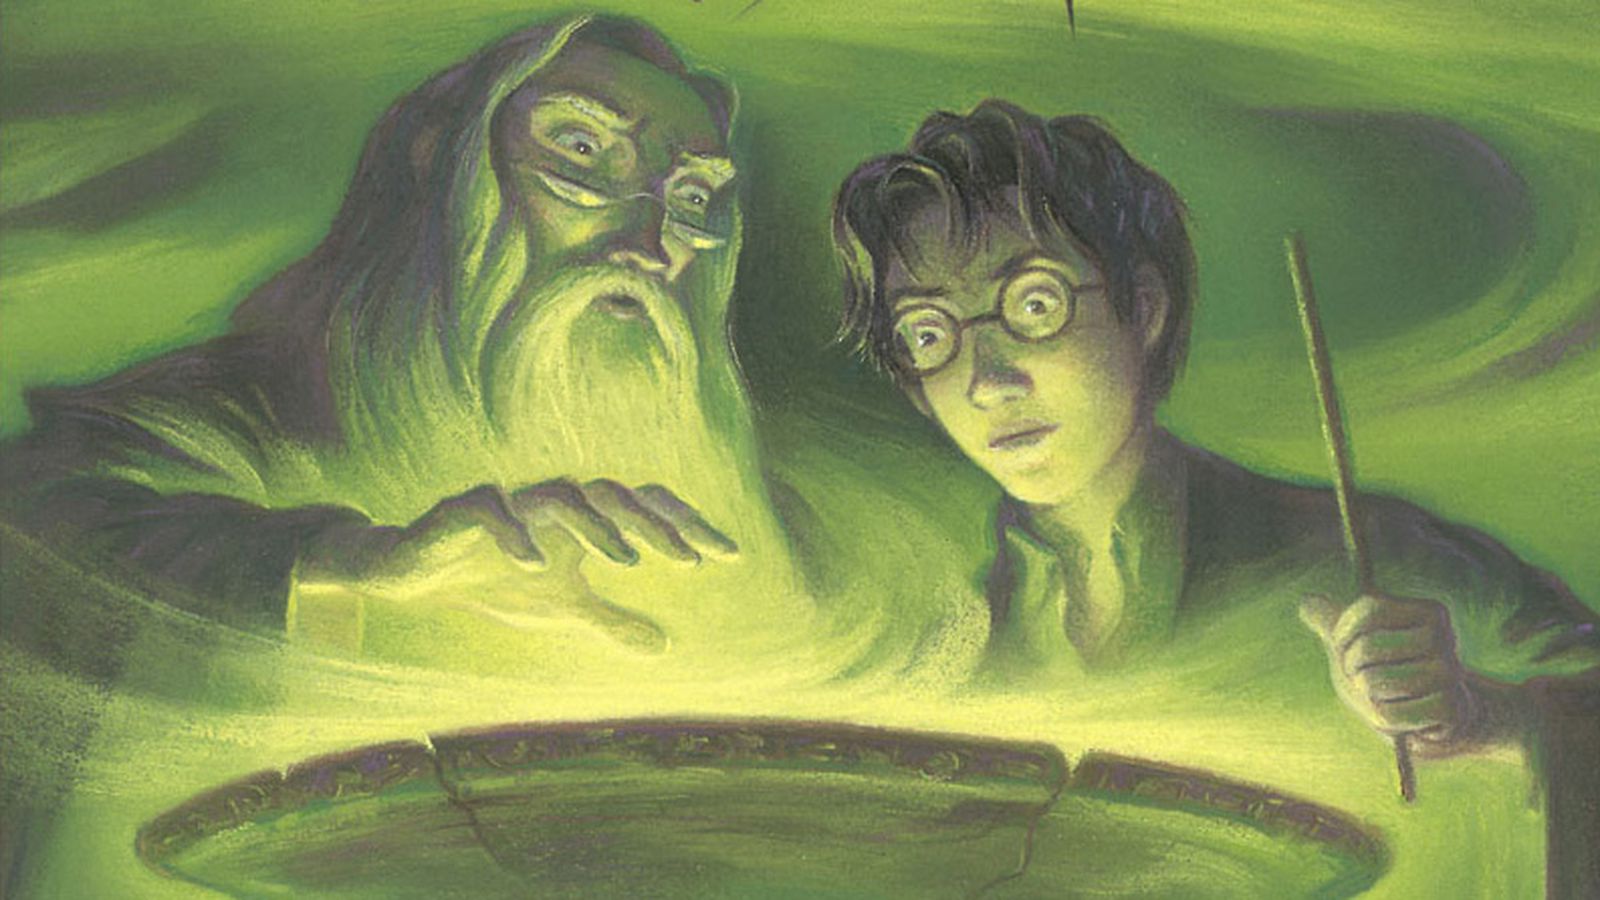 Harry potter and the goblet of fire book new cover